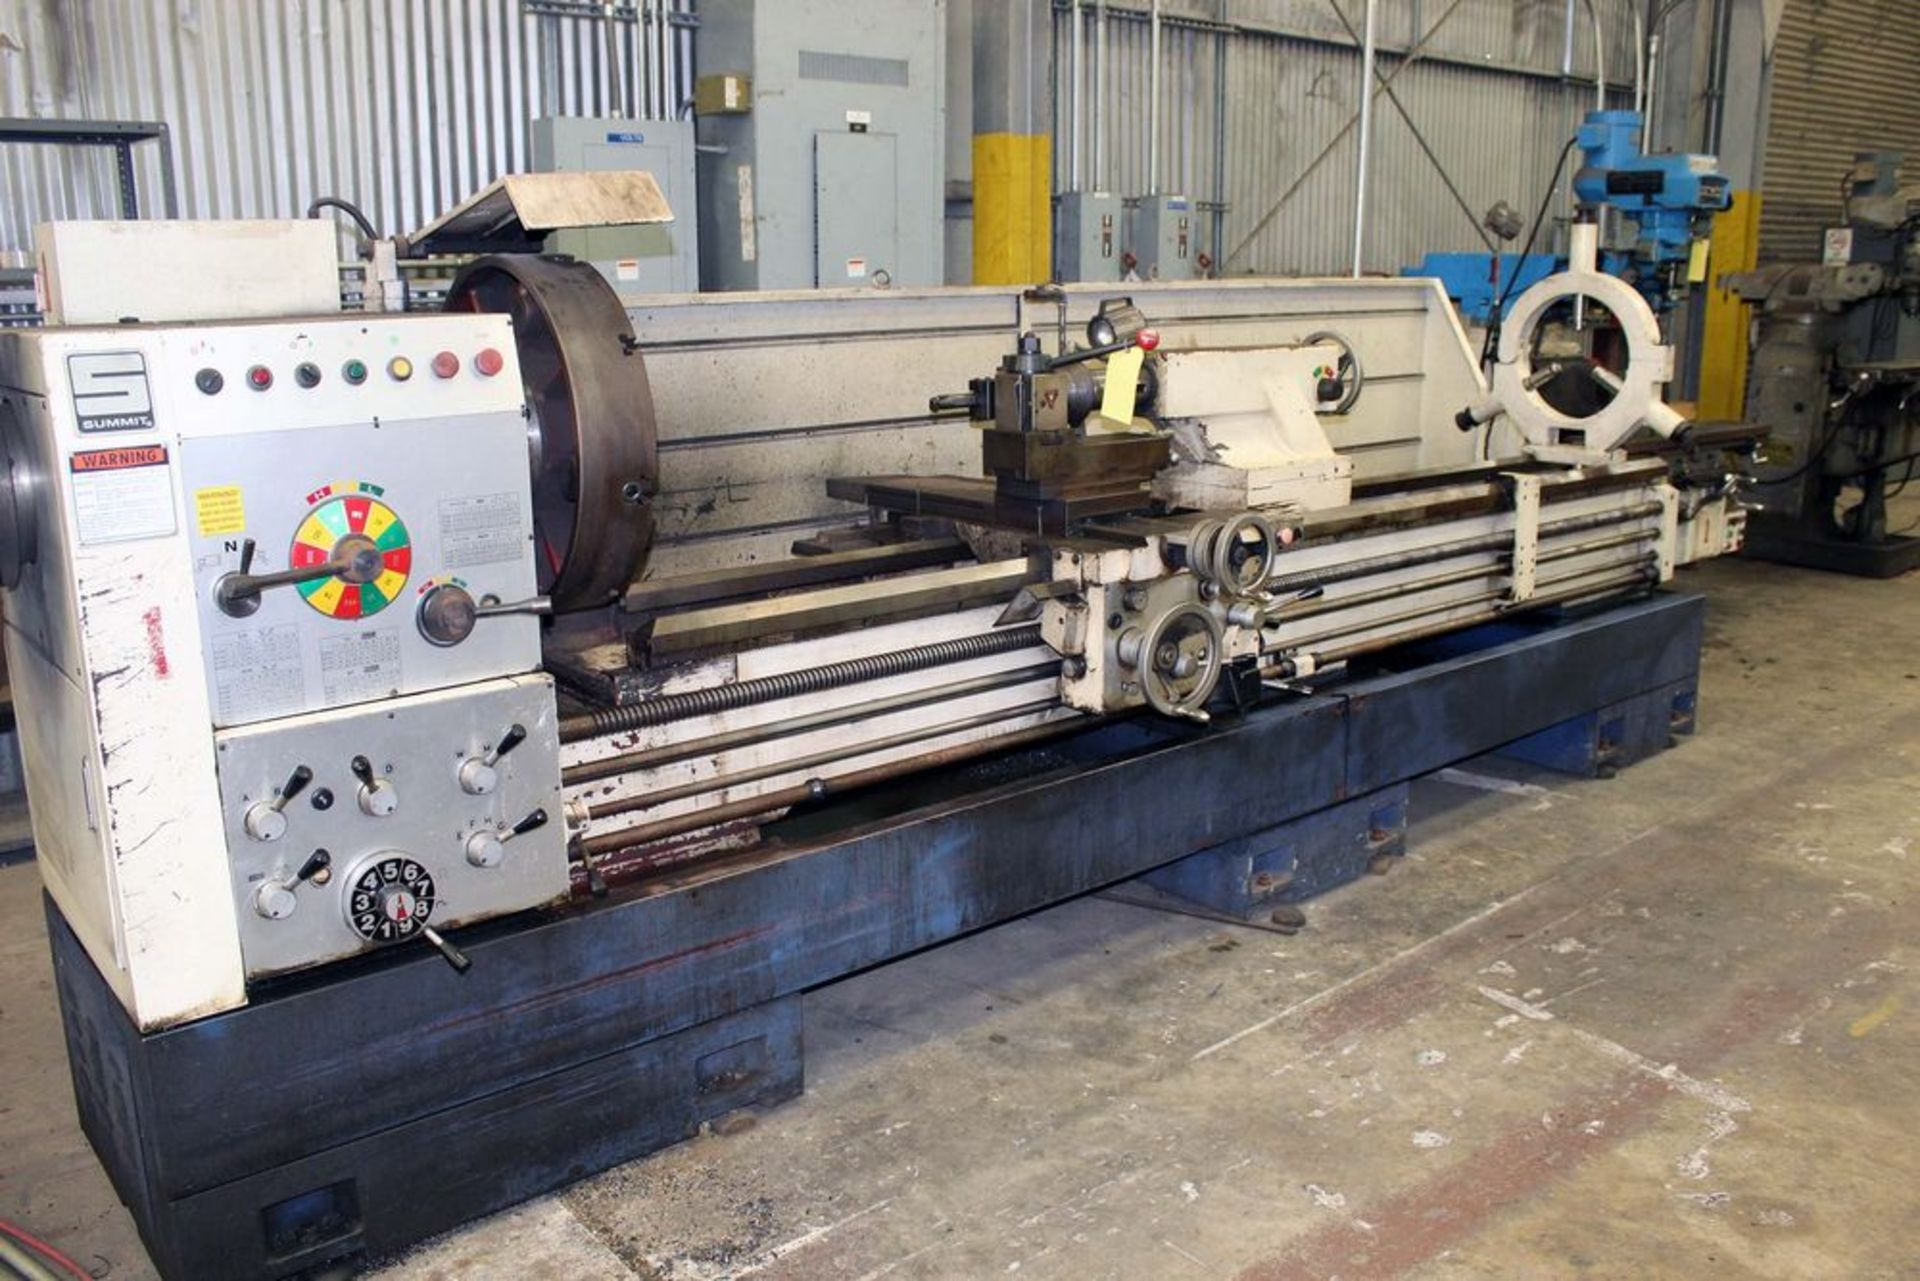 HOLLOW SPINDLE ENGINE LATHE, SUMMIT MDL. 26-6X120, 6-1/4" spdl. bore, 800 RPM, front & rear 24” dia.